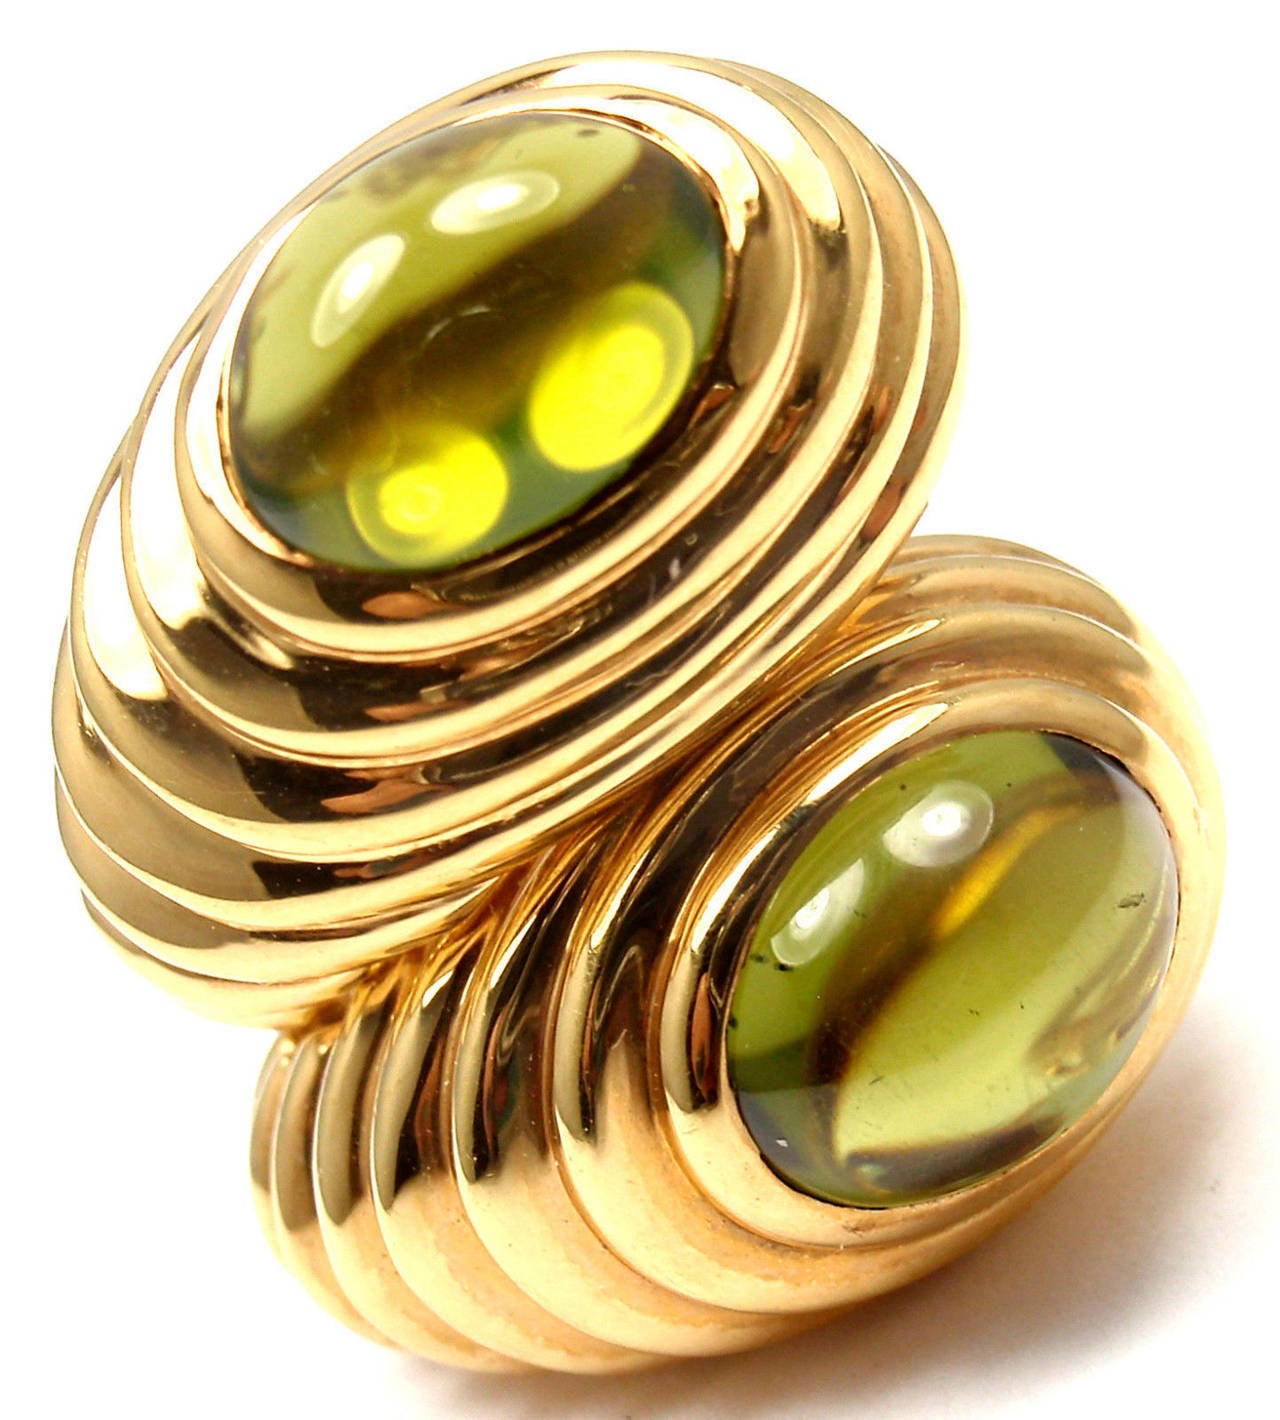 18k Yellow Gold Cabochon Peridot Earrings by Bulgari. 
With 2 oval cabochon peridots 10mm x 9mm

Details: 
Measurements: 21mm x 13mm
Weight: 18.5 grams
Stamped Hallmarks: Bvlgari, 750, 1970AL
*Free Shipping within the United States*

YOUR